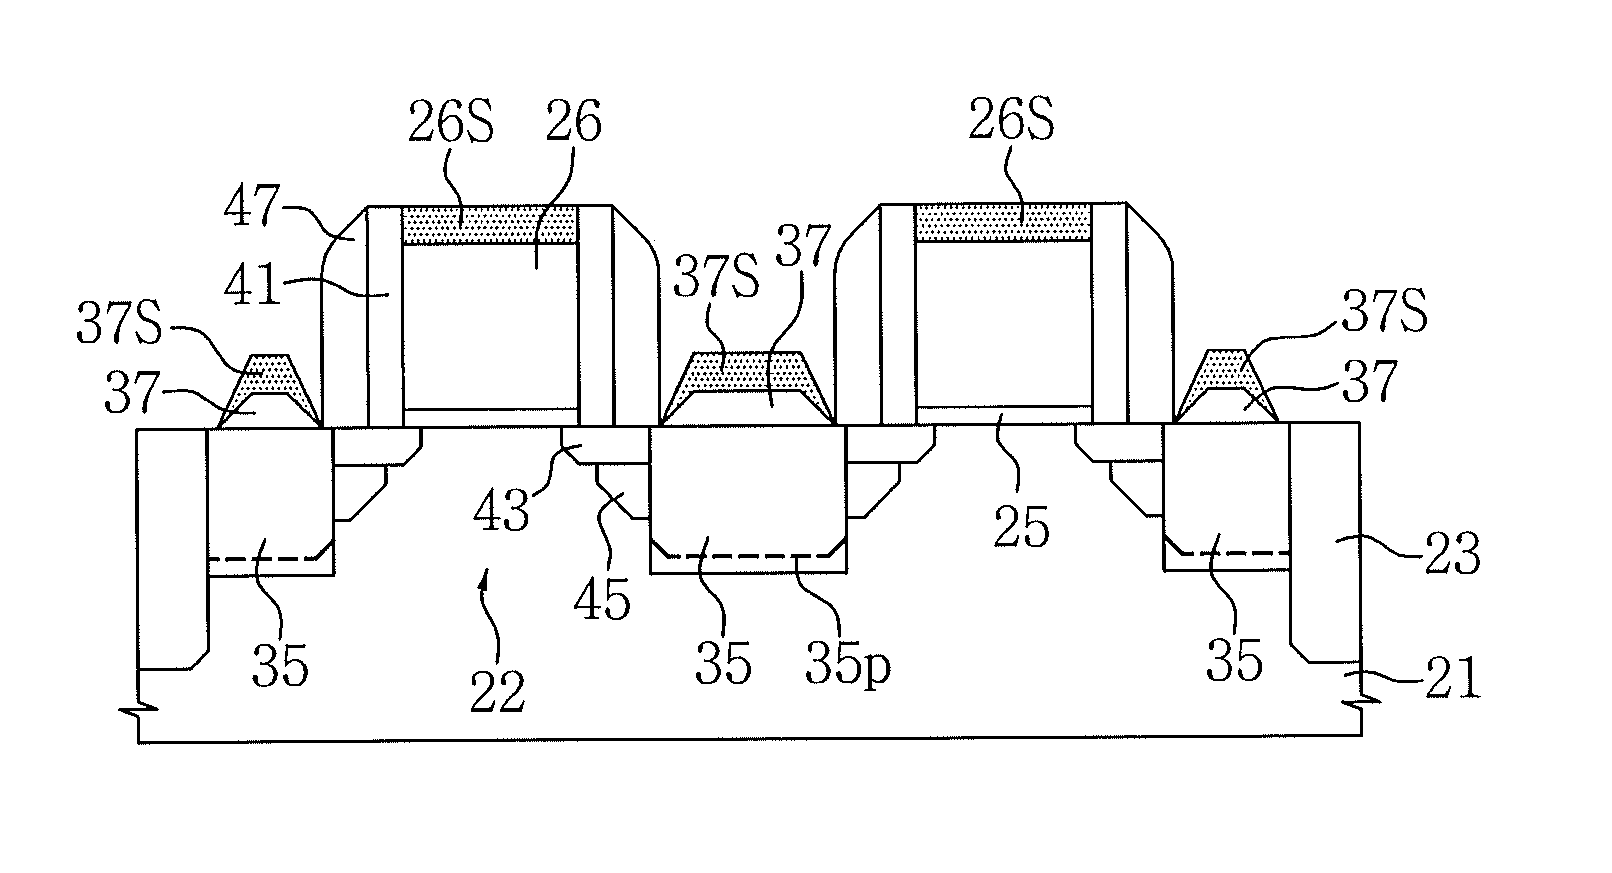 Methods of Forming Semiconductor Devices Having Faceted Semiconductor Patterns